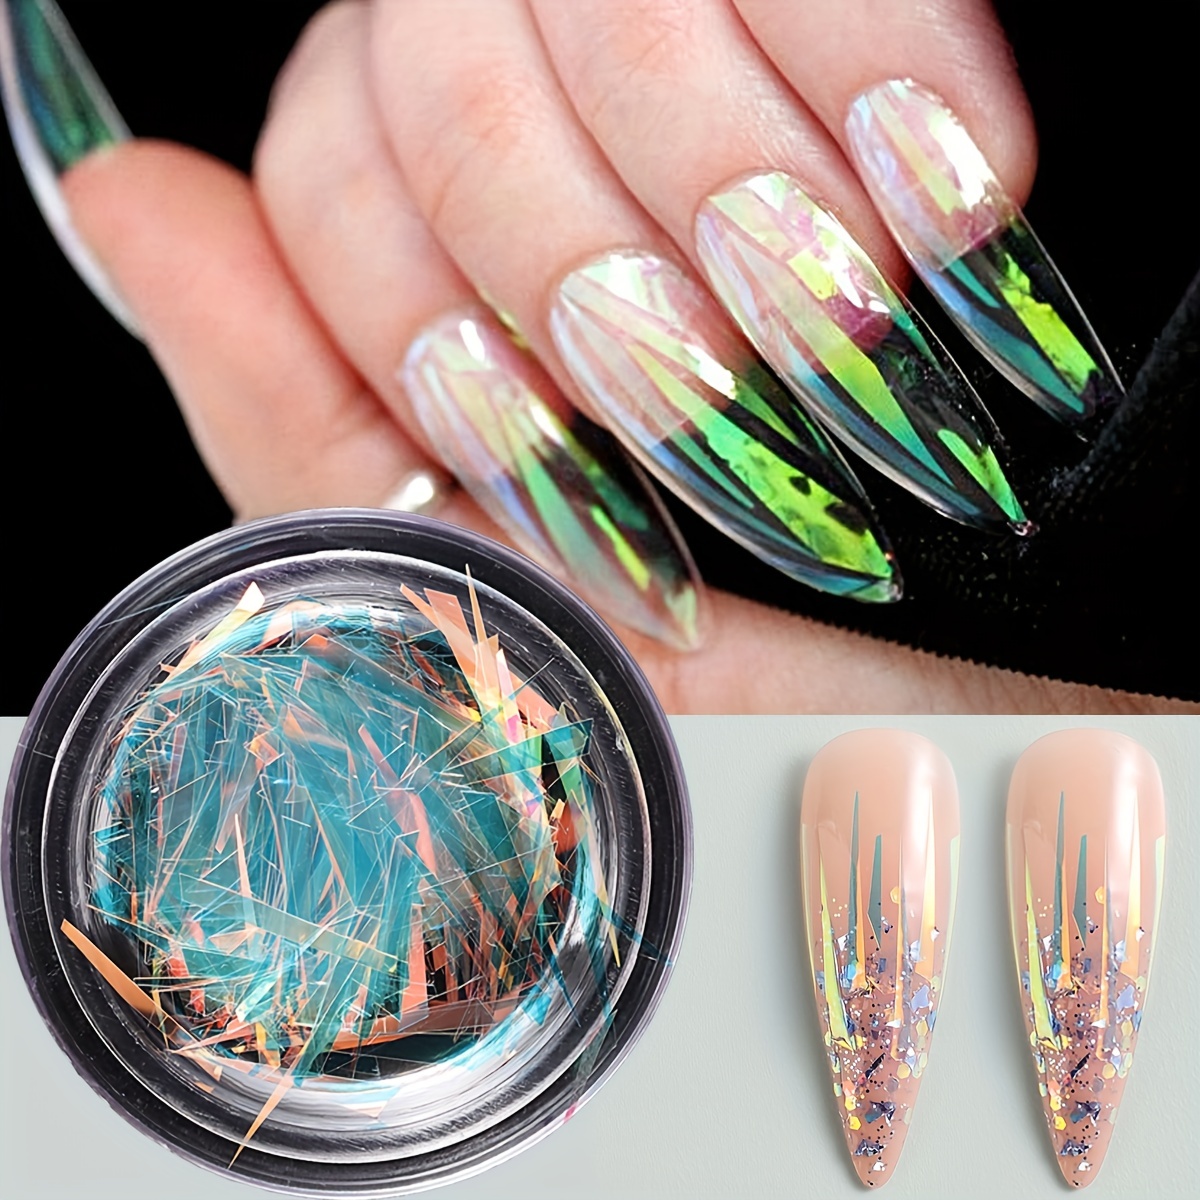 12 Colors Holographic Nail Art Glitter Sequins Iridescent Ice Slag